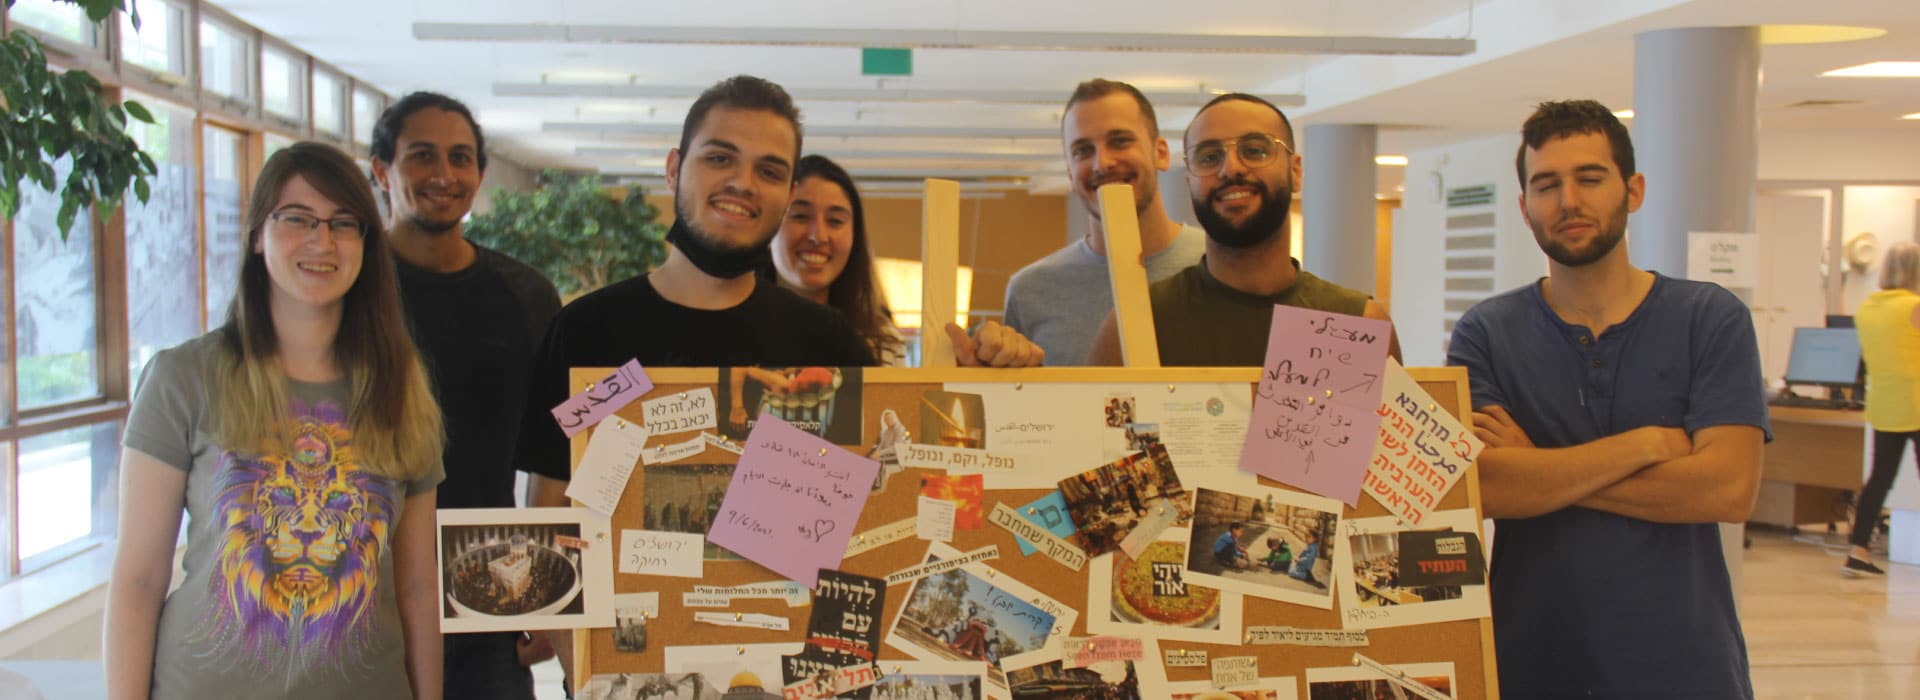 A group of university students showcasing their work on a board